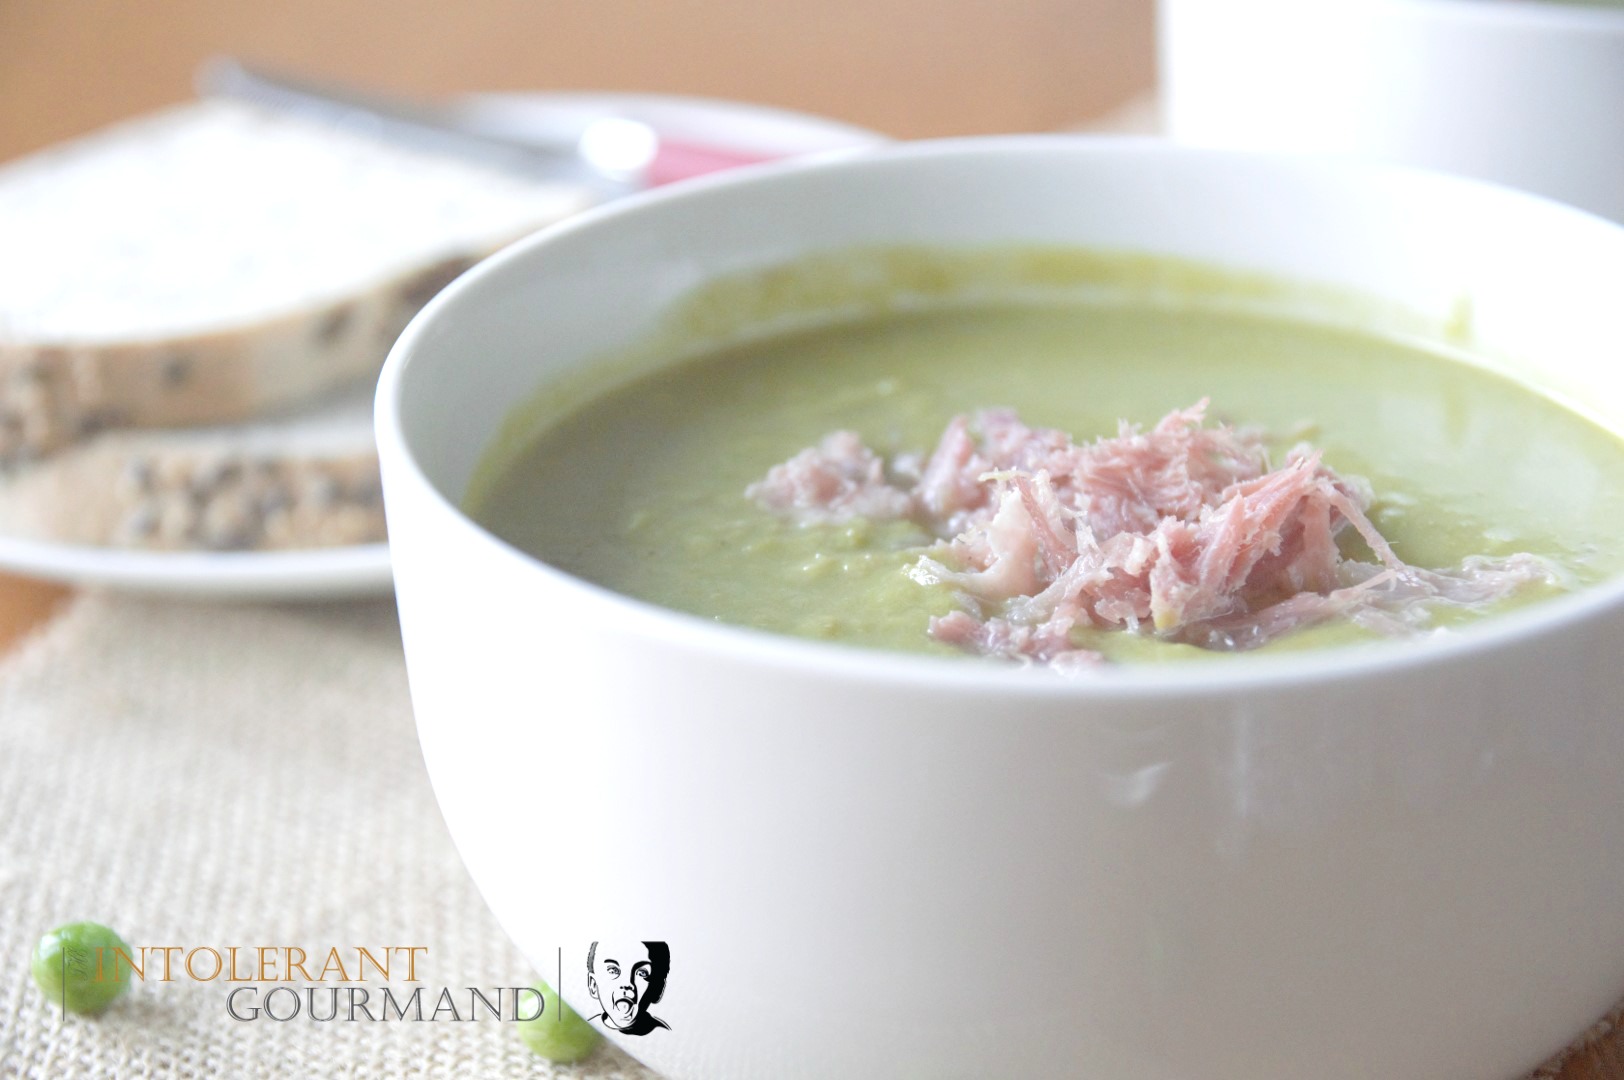 Green veg soup - naturally gluten-free, packed full of vitamins and nutrients, delicious and simple to make! Perfect for lunch or light dinner! www.intolerantgourmand.com